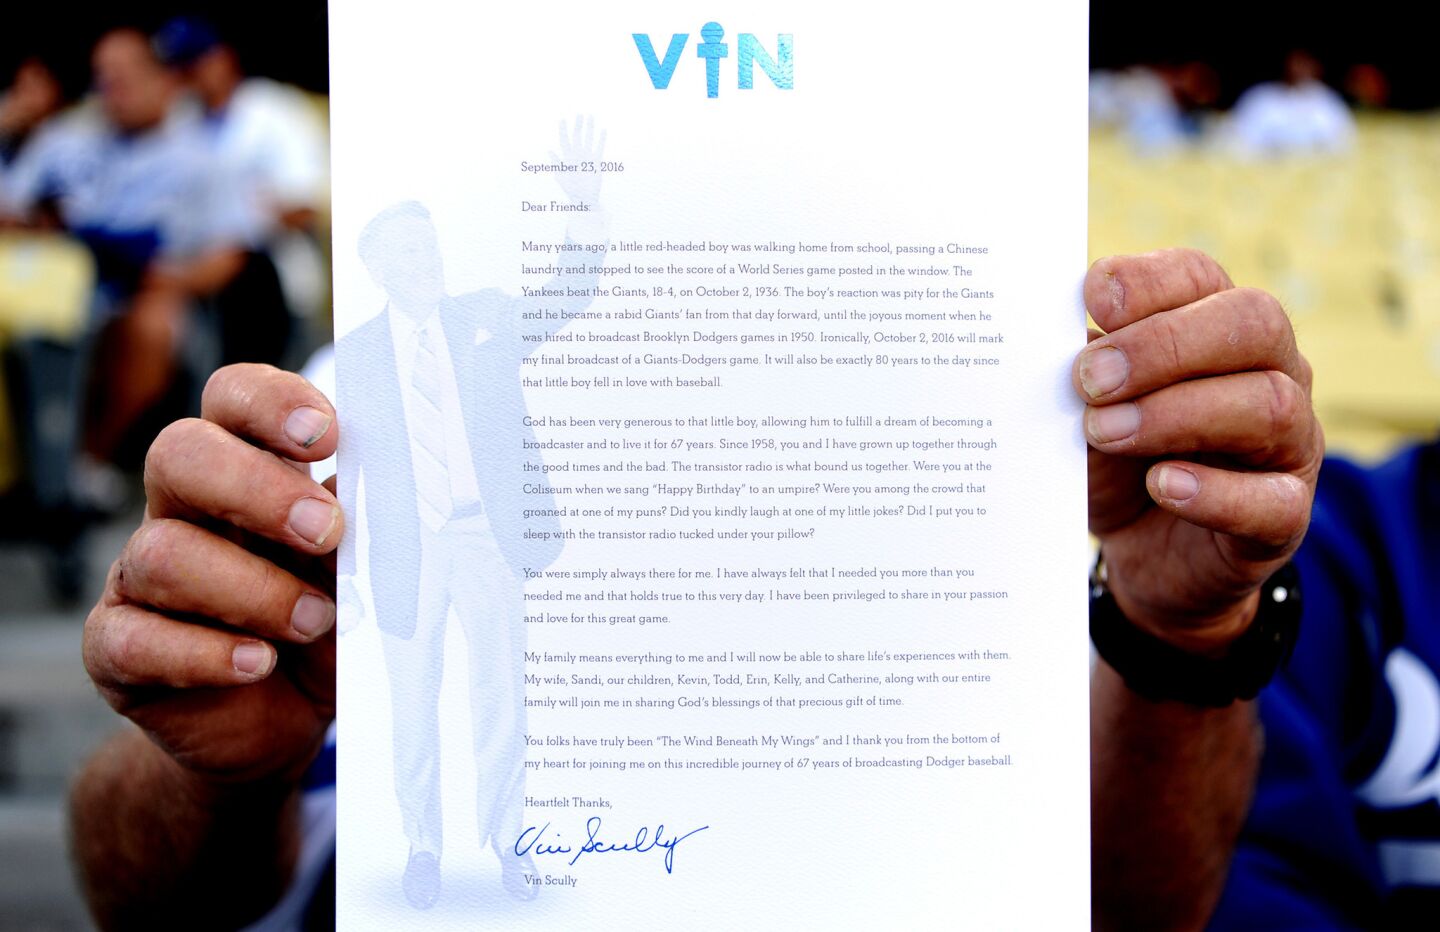 A fan holds a letter from Vin Scully that was given out before the Dodgers game on Friday night.